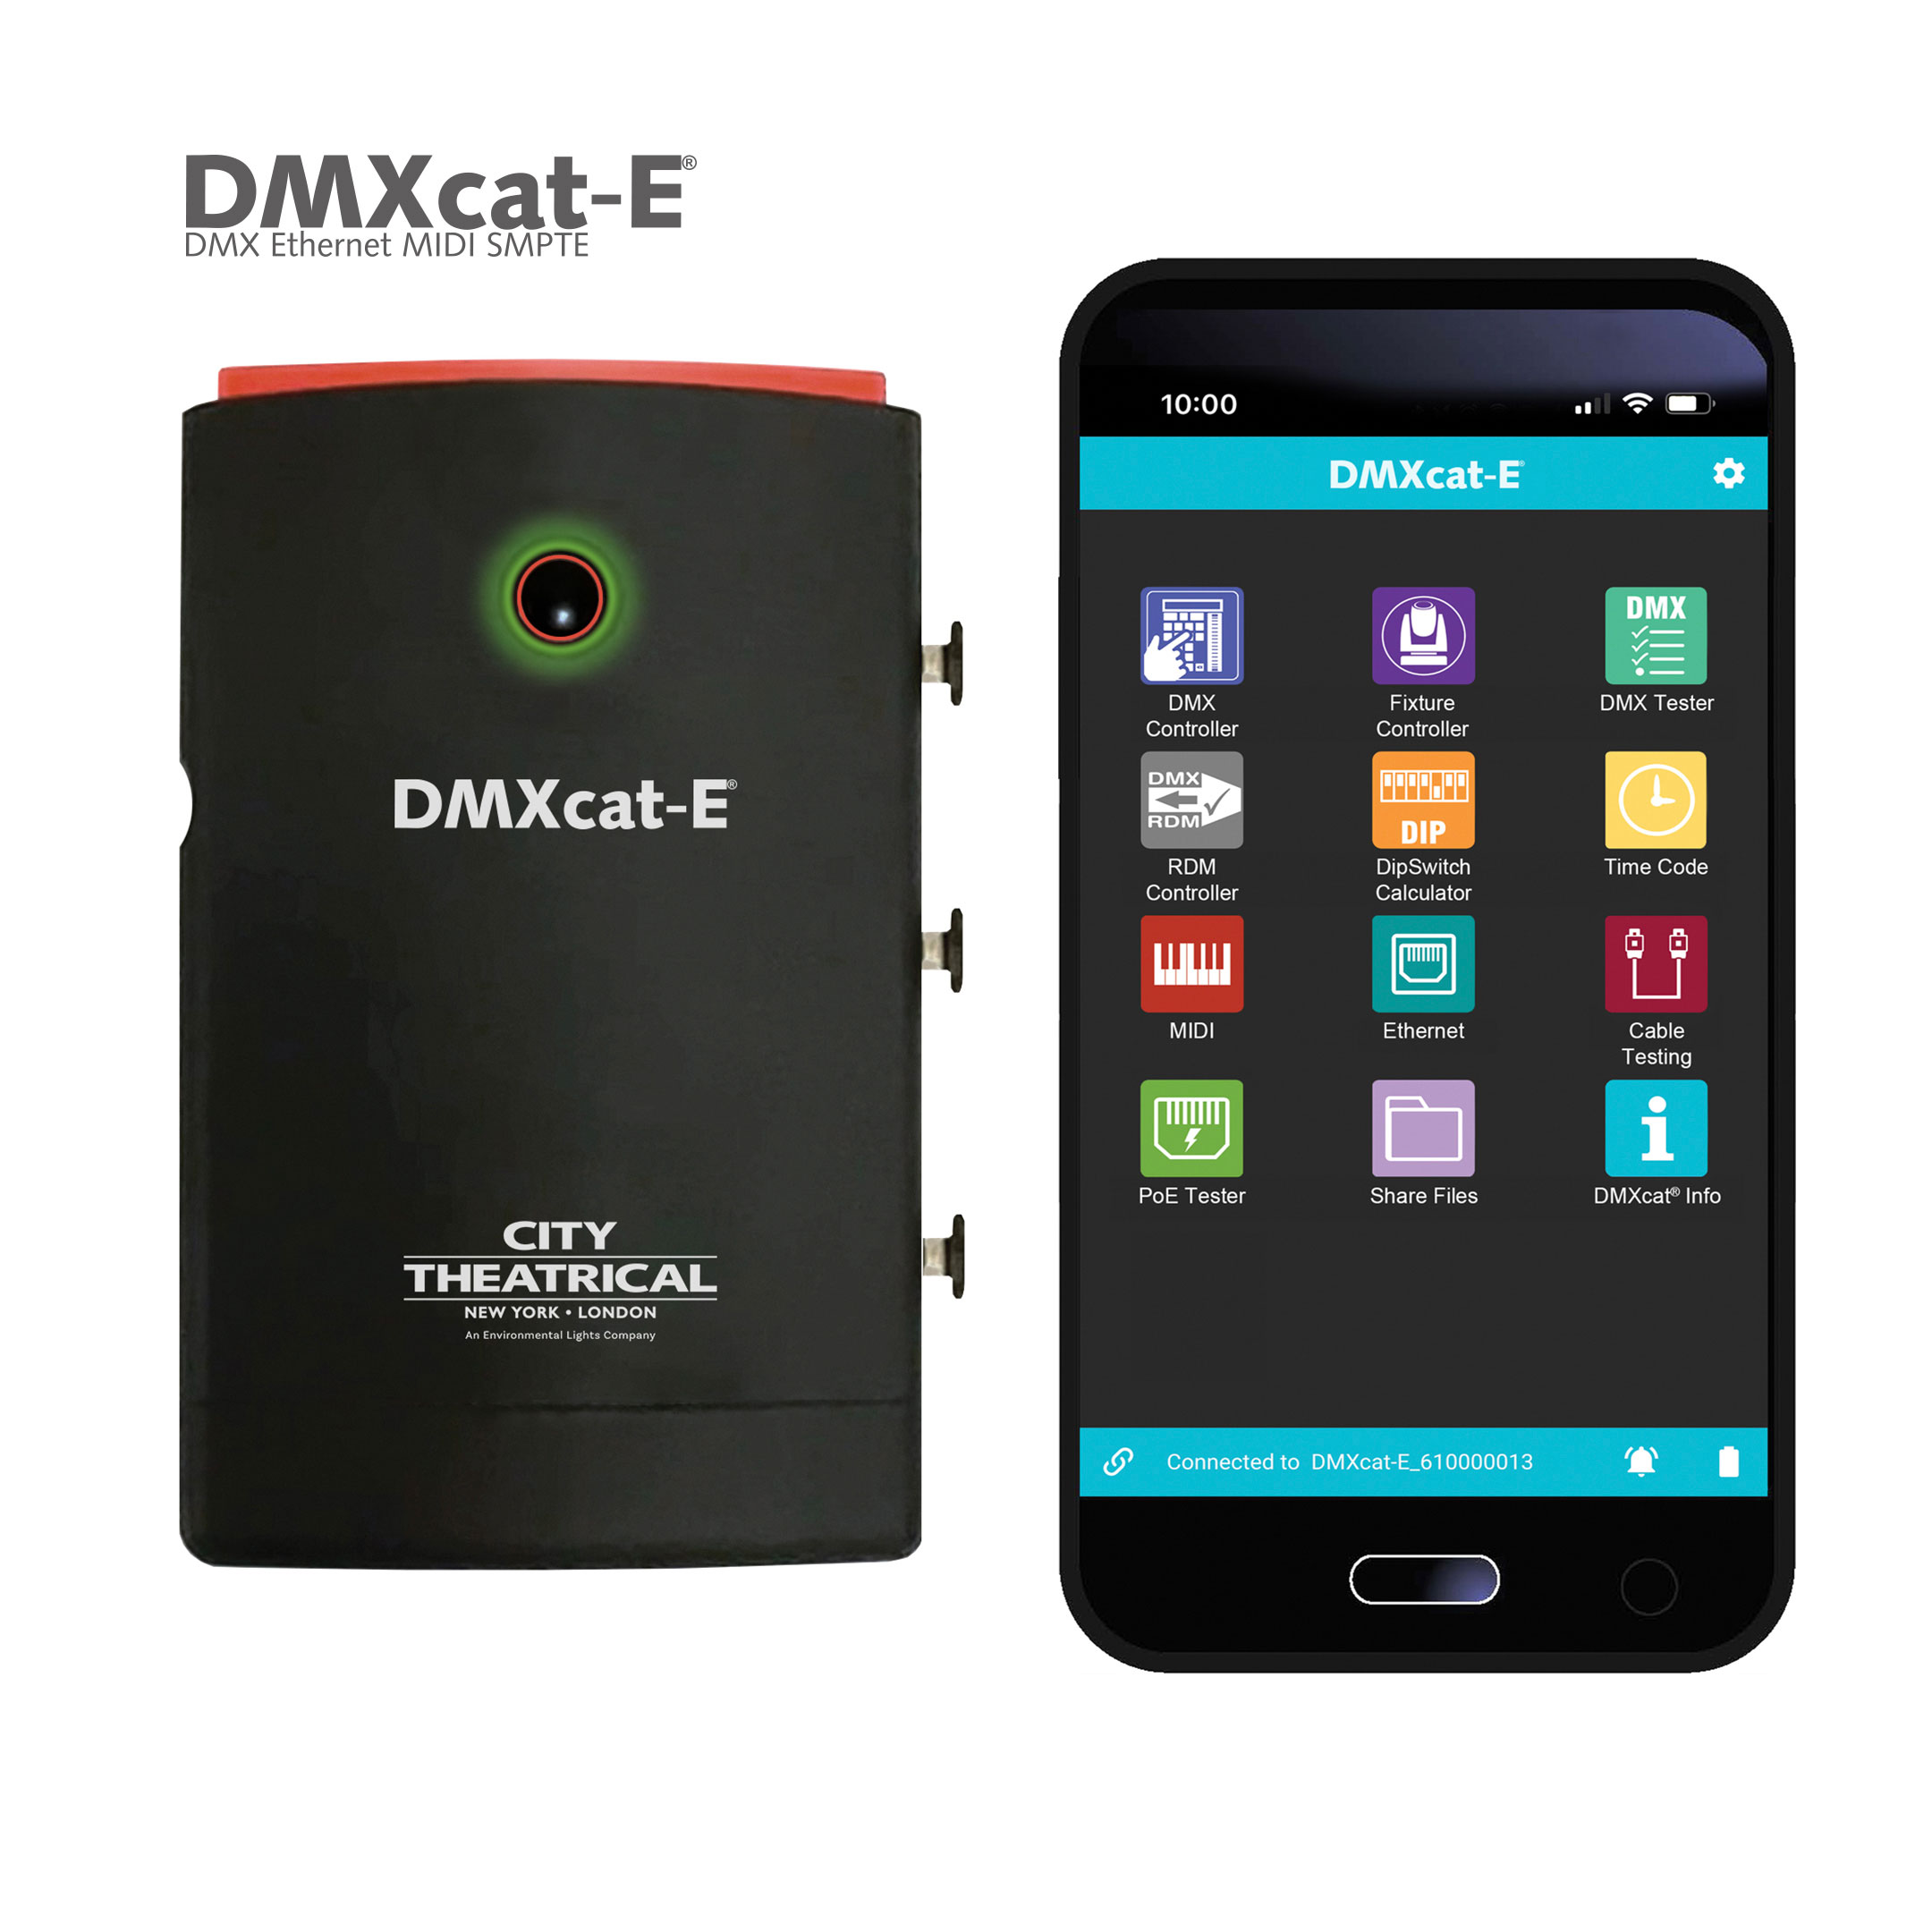 6100 DMXcat-E dongle and smartphone app straight with logo